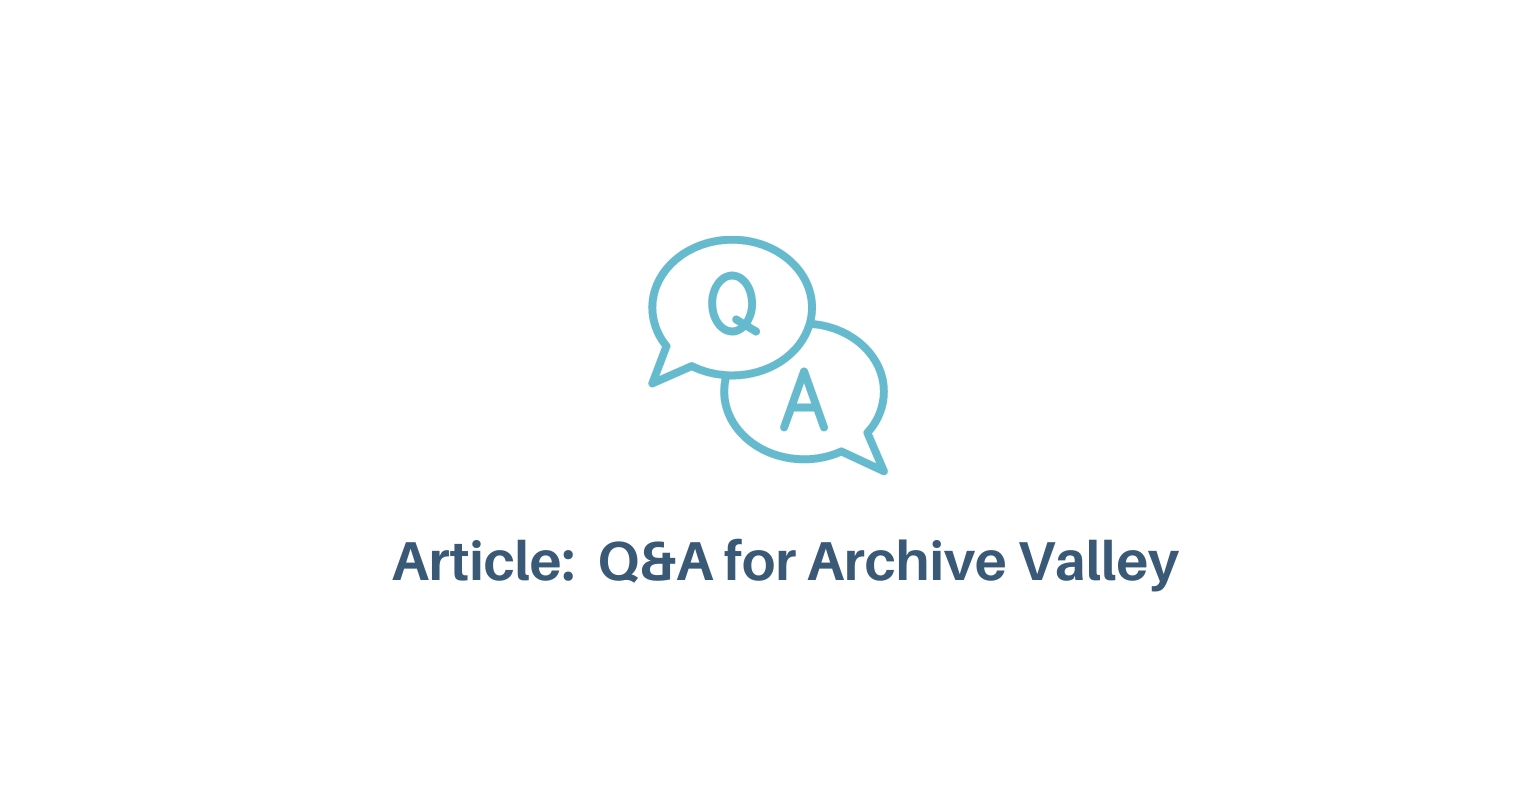 ARTICLE: Q&A FOR ARCHIVE VALLEY